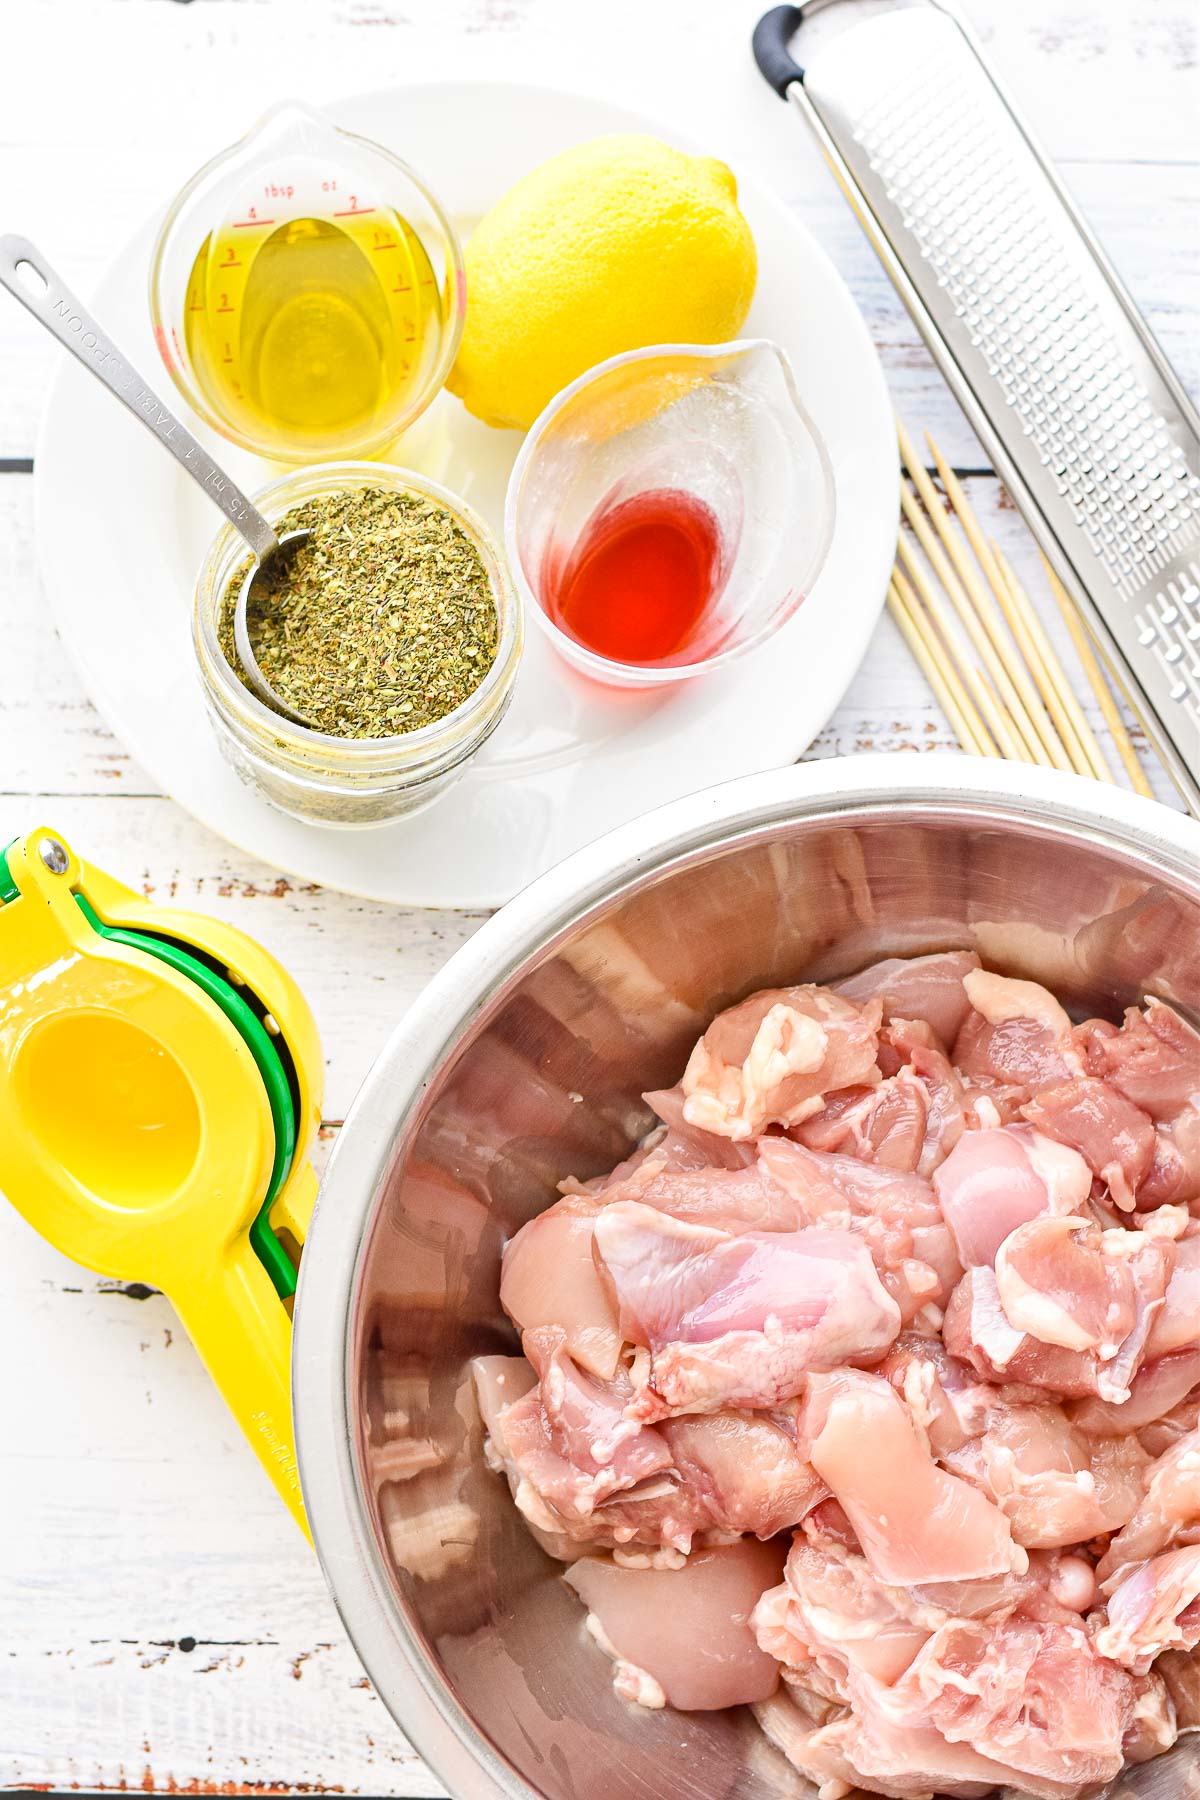 low fodmap chicken souvlaki ingredients including boneless skinless chicken thigh pieces, garlic infused olive oil, lemon juice and zest from a lemon, red wine vinegar, and low fodmap greek seasoning next to a citrus zester and juicer and wooden skewers